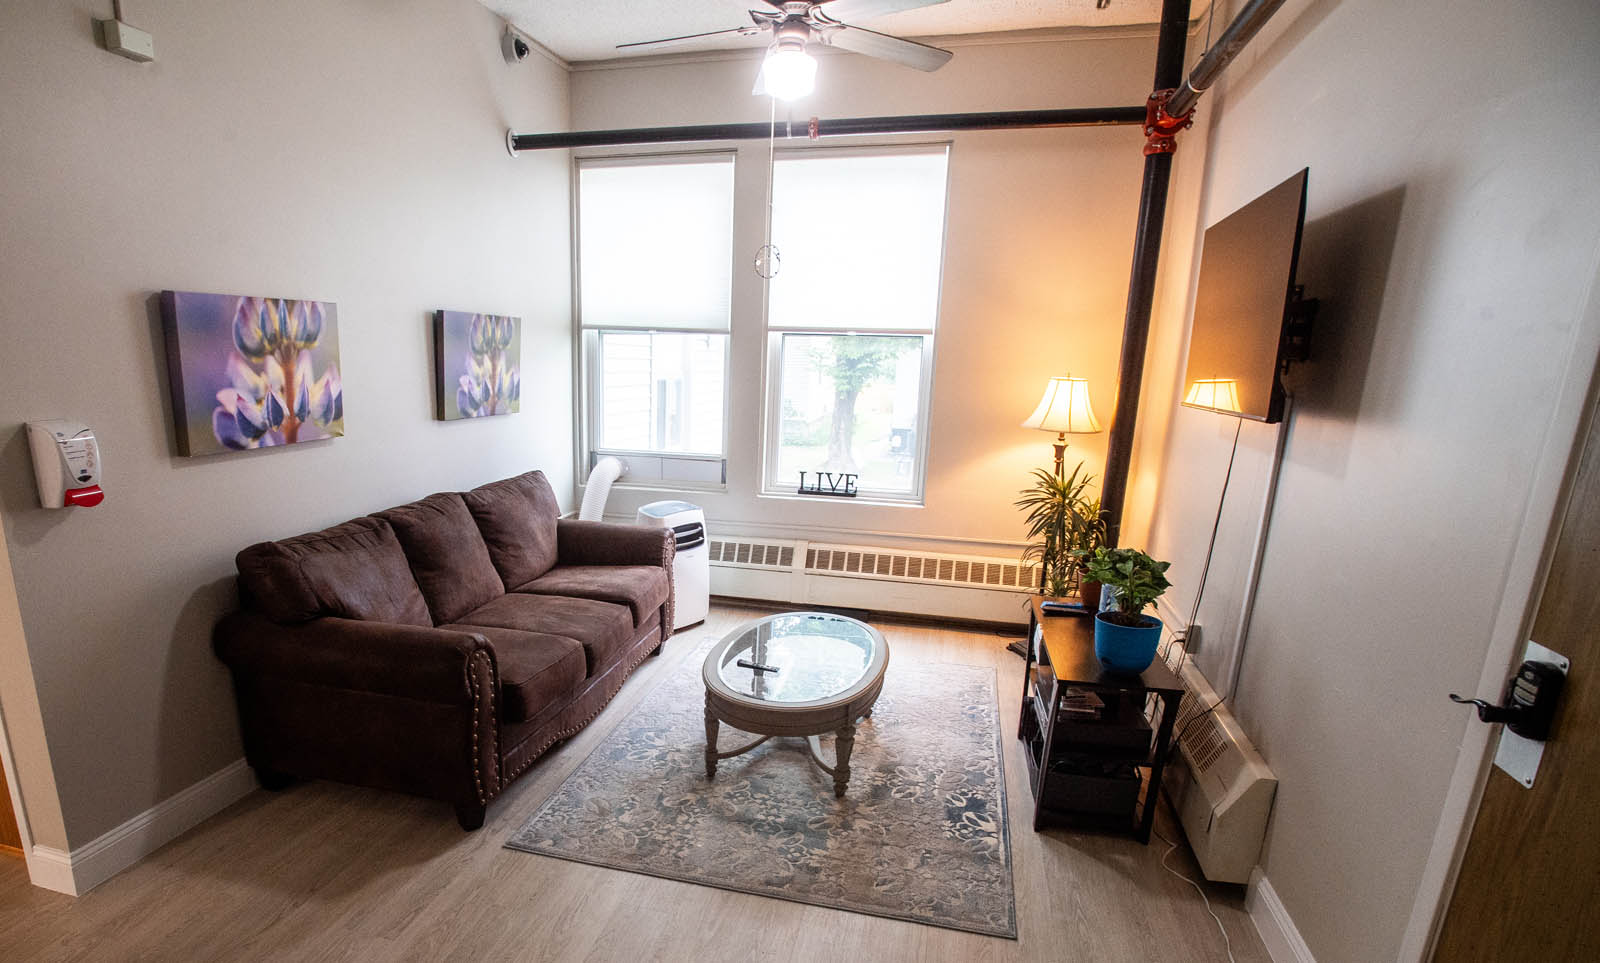 A lounge area with a couch and a TV in the Wellstone Center for Recovery.